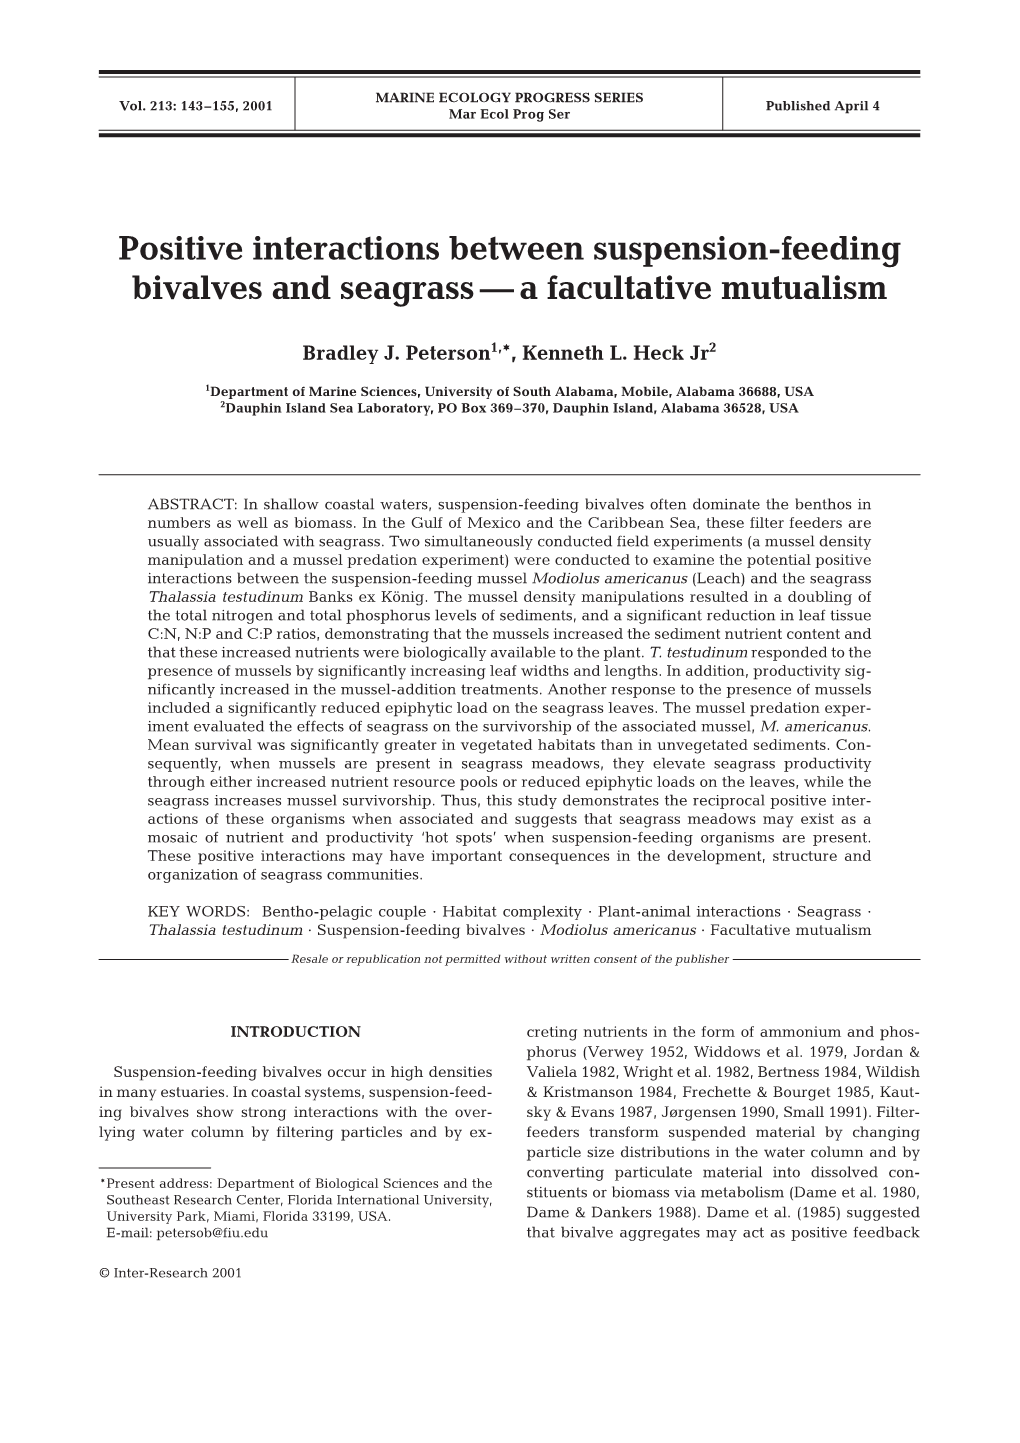 Positive Interactions Between Suspension-Feeding Bivalves and Seagrass — a Facultative Mutualism